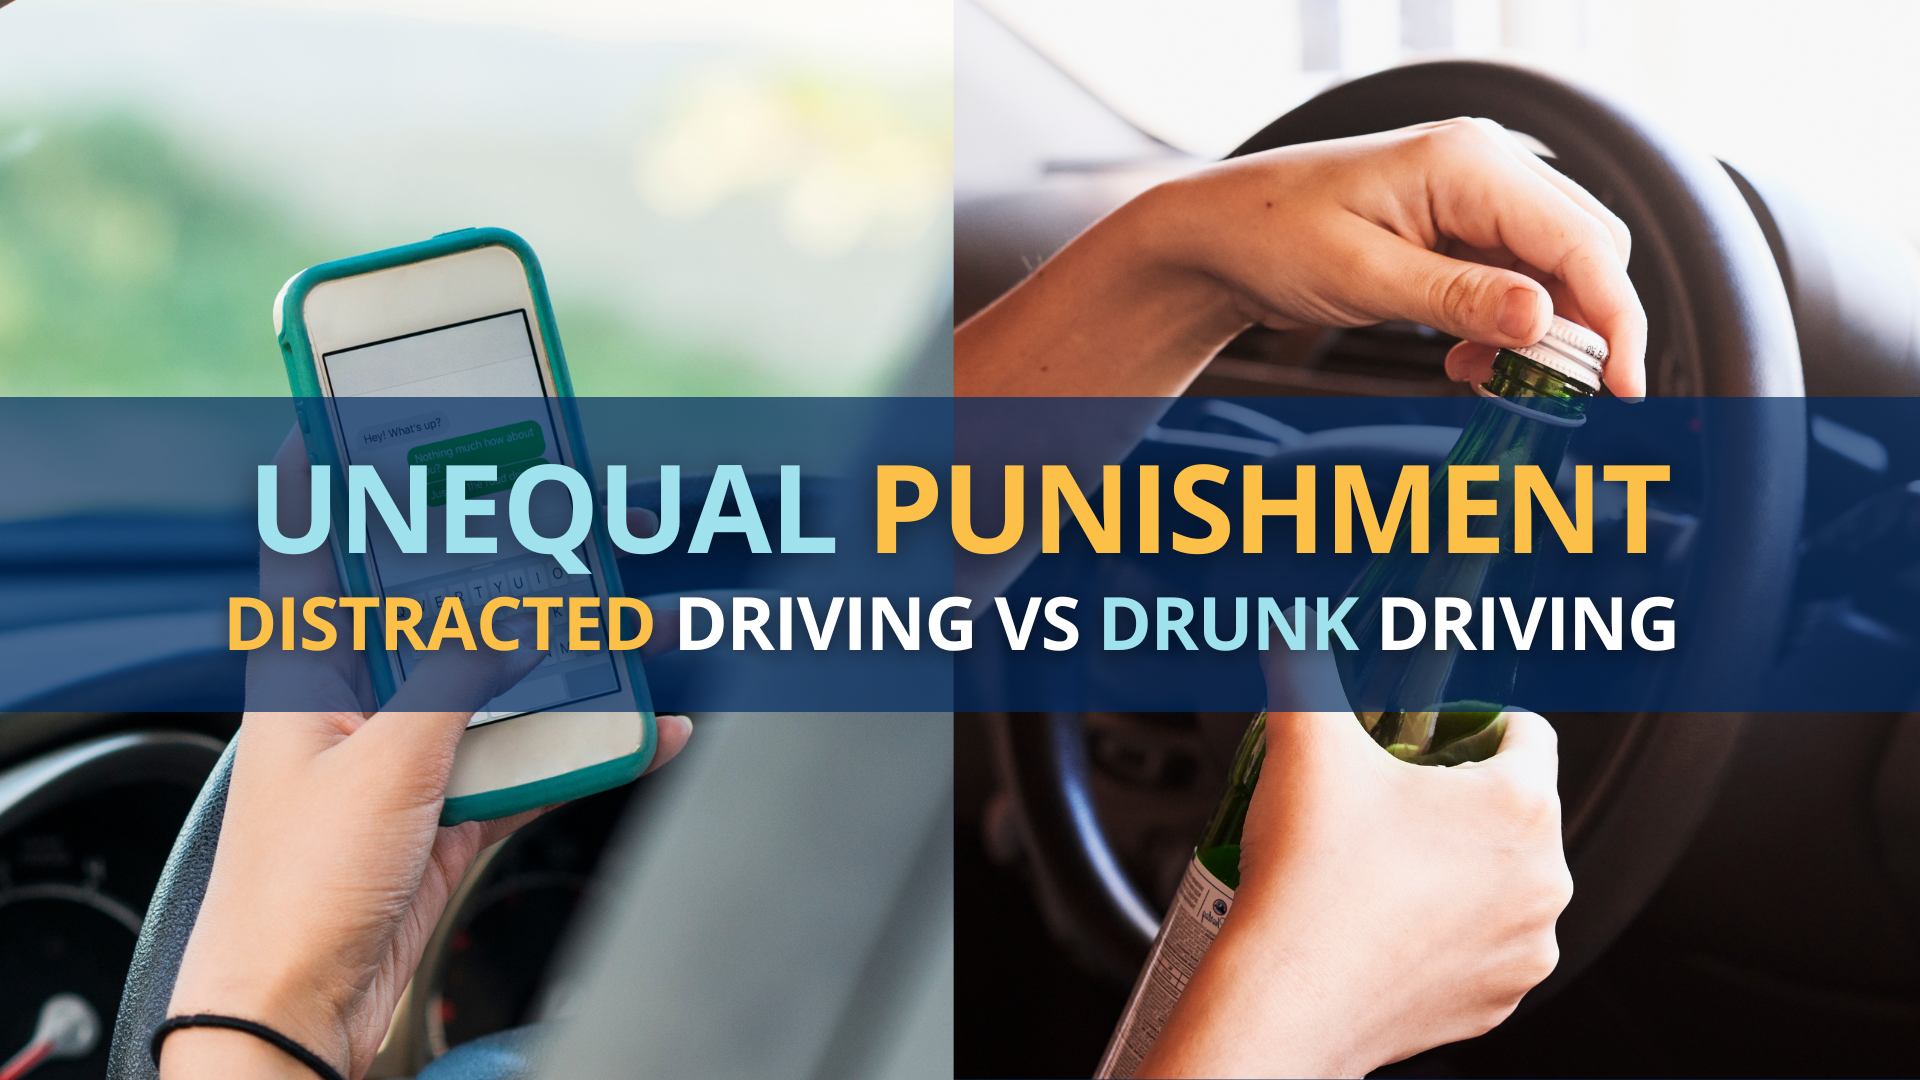 Distracted Driving vs Drunk Driving: Punishment Is Unequal